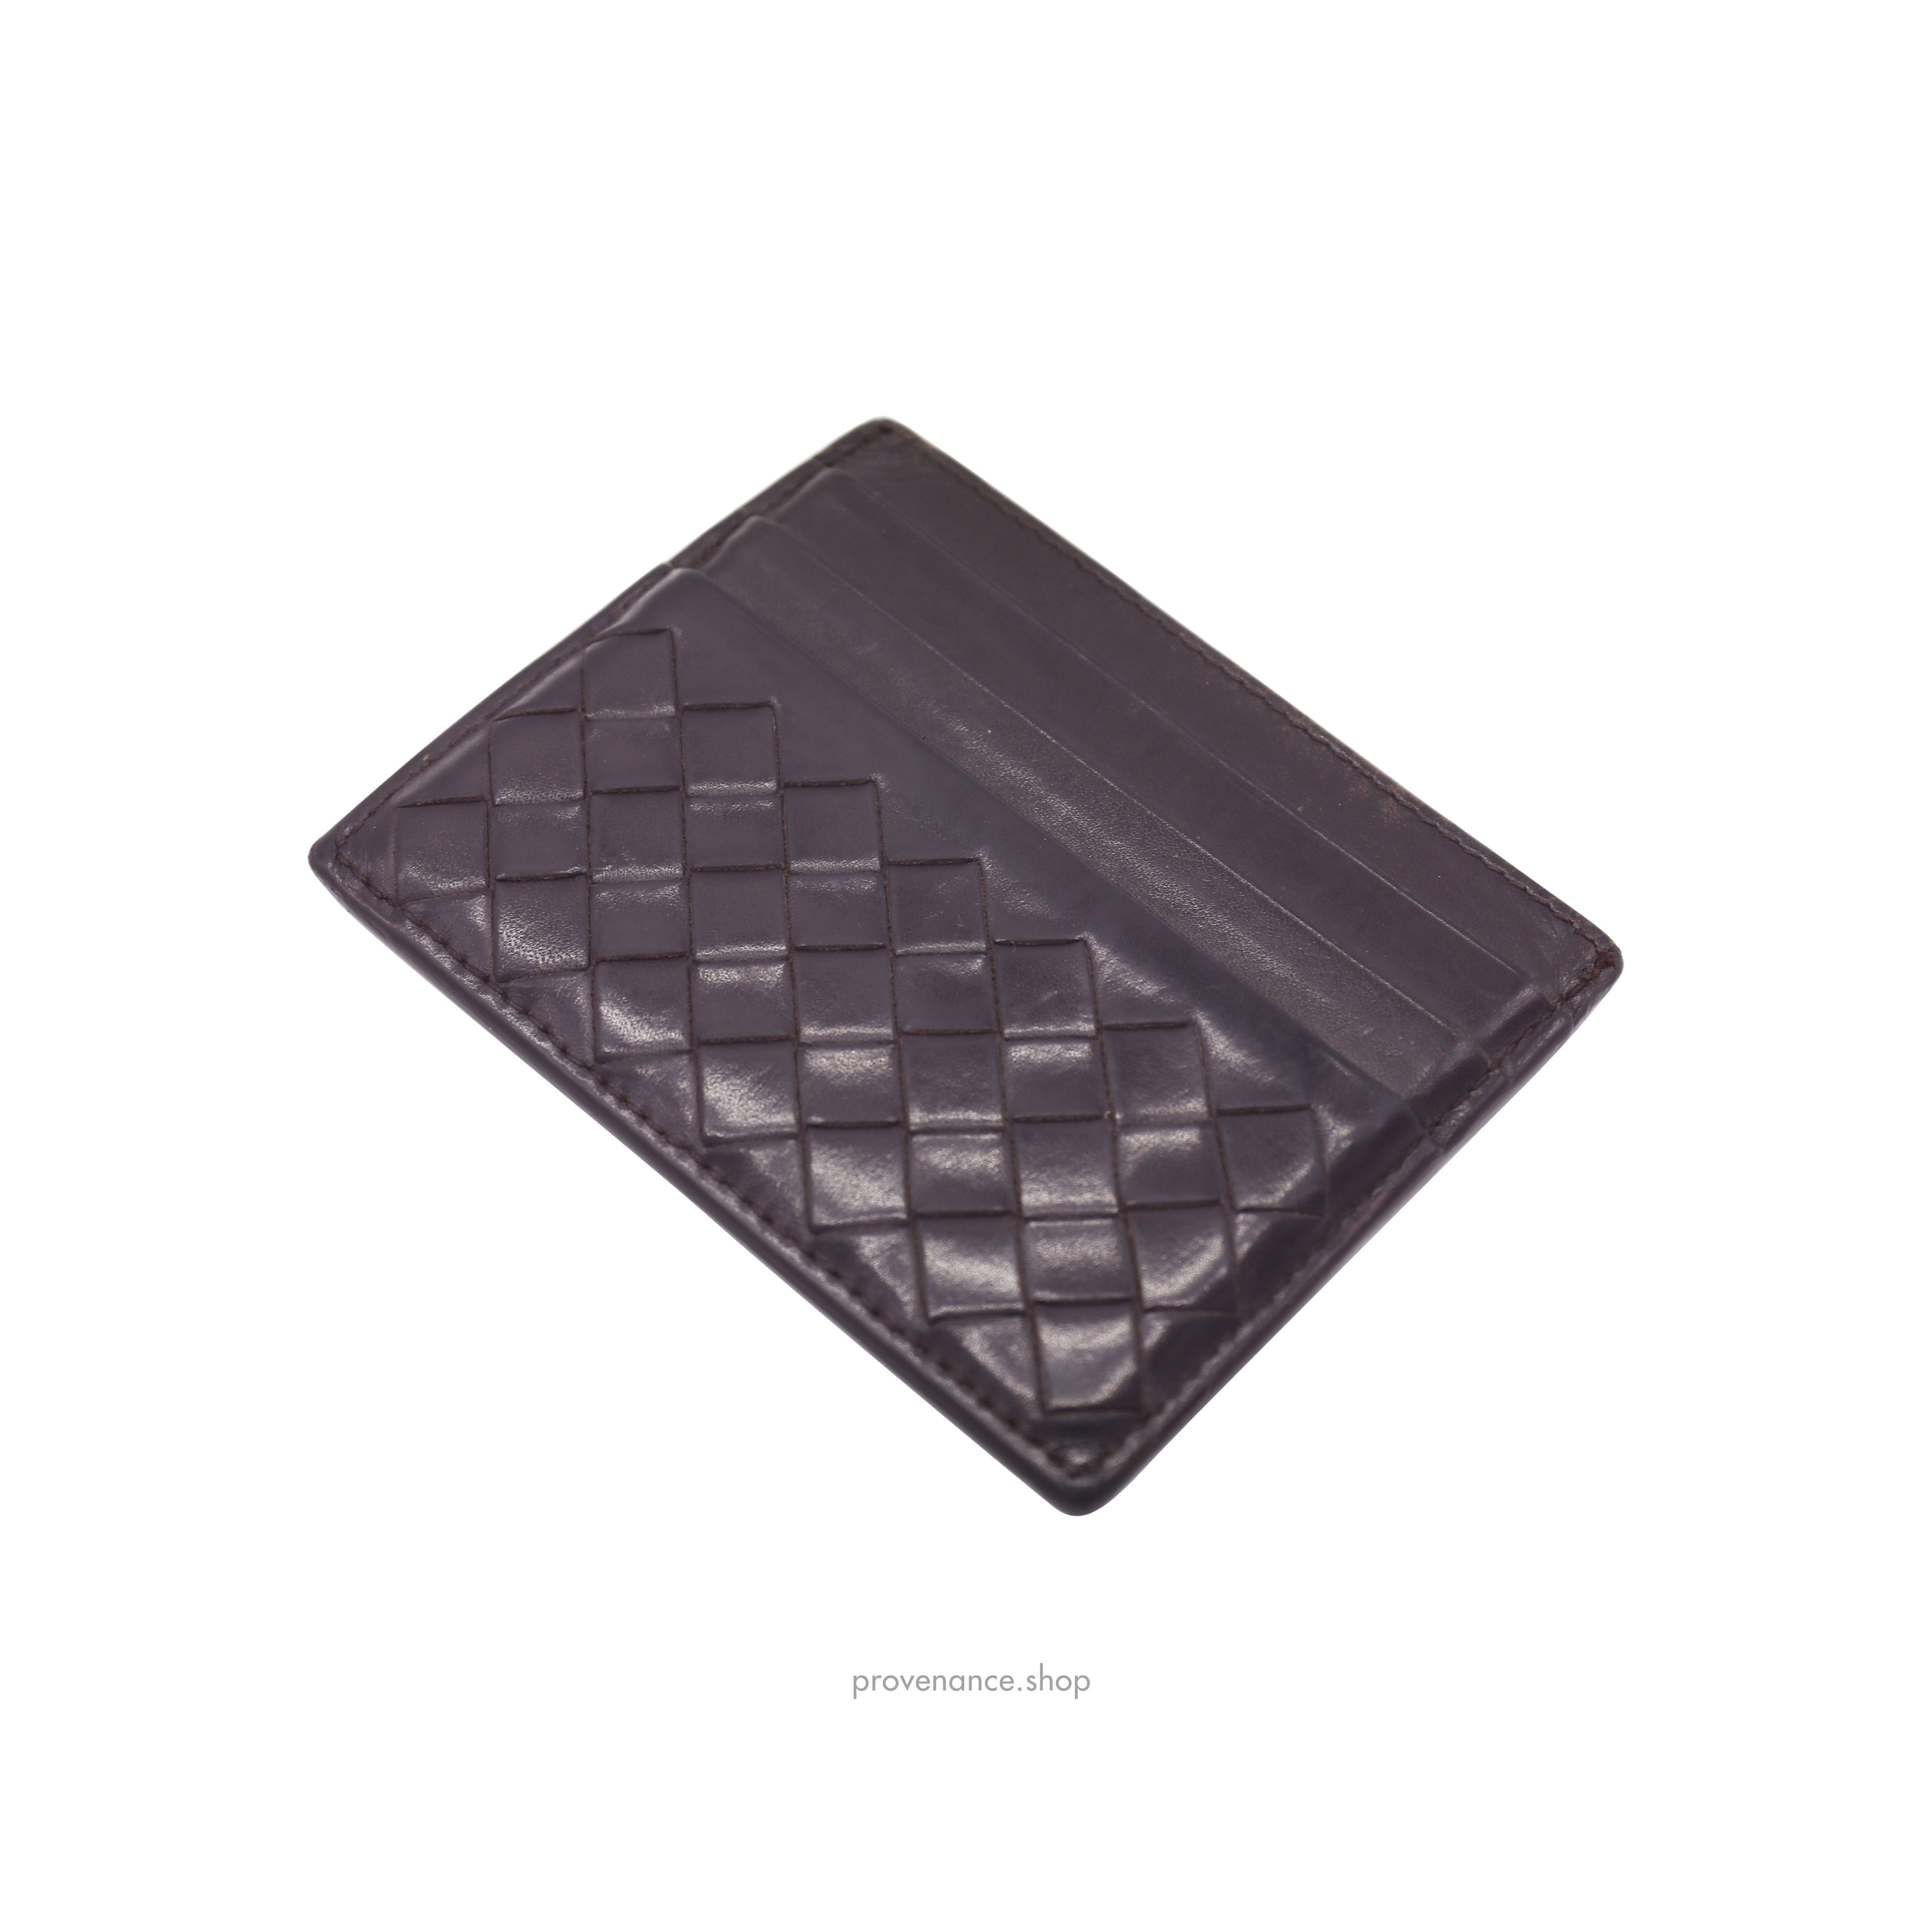 Card Holder Wallet - Chocolate Intrecciato Leather - 4